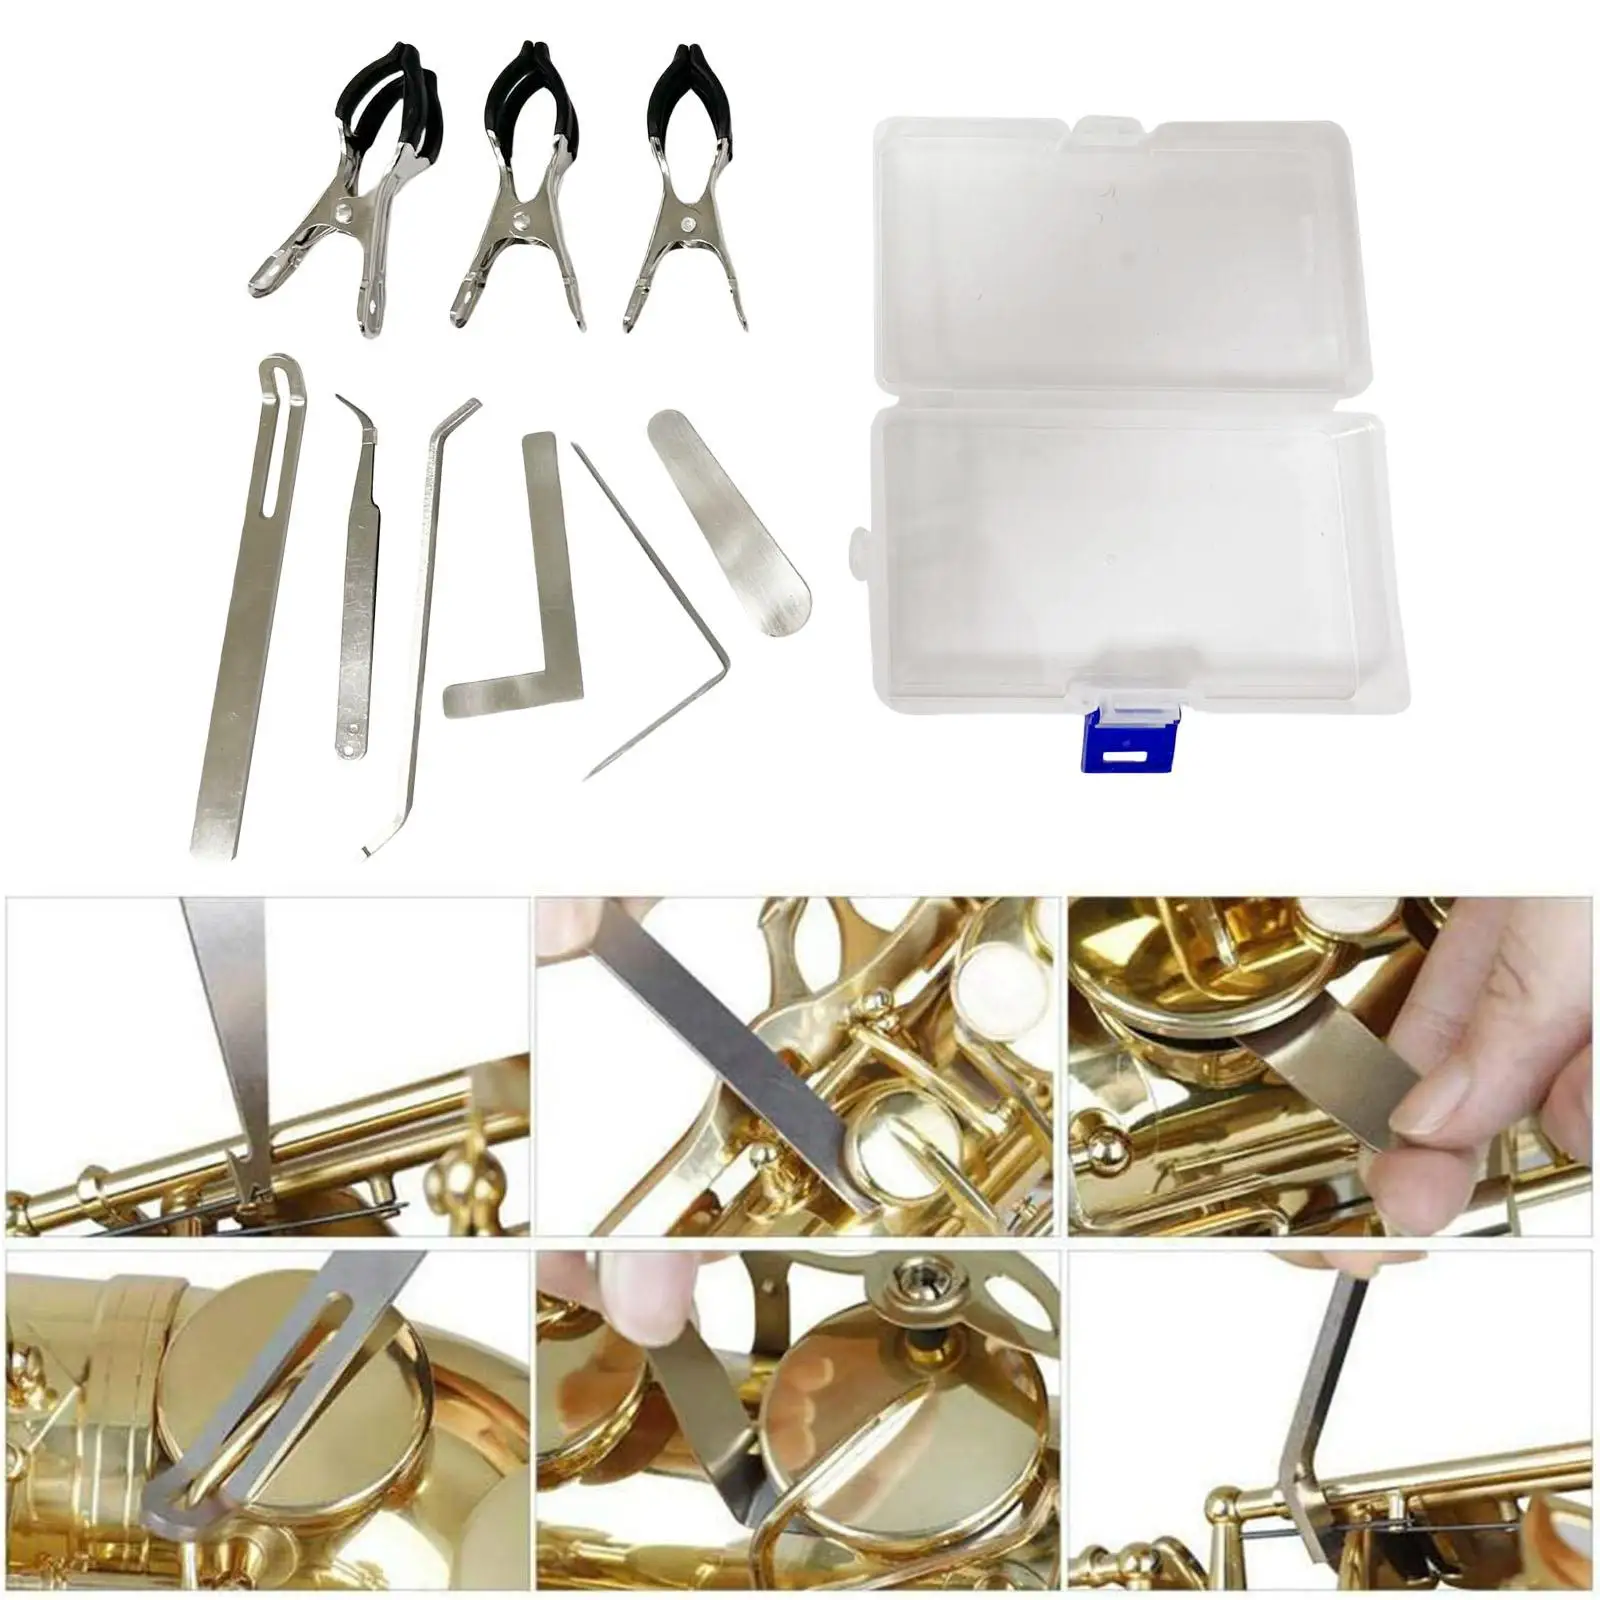 9x Stainless Steel Saxophone Repair Tool with Storage Box Key Cover Adjusting Spring Hook Trimming Tool Set for Sax Clarinet